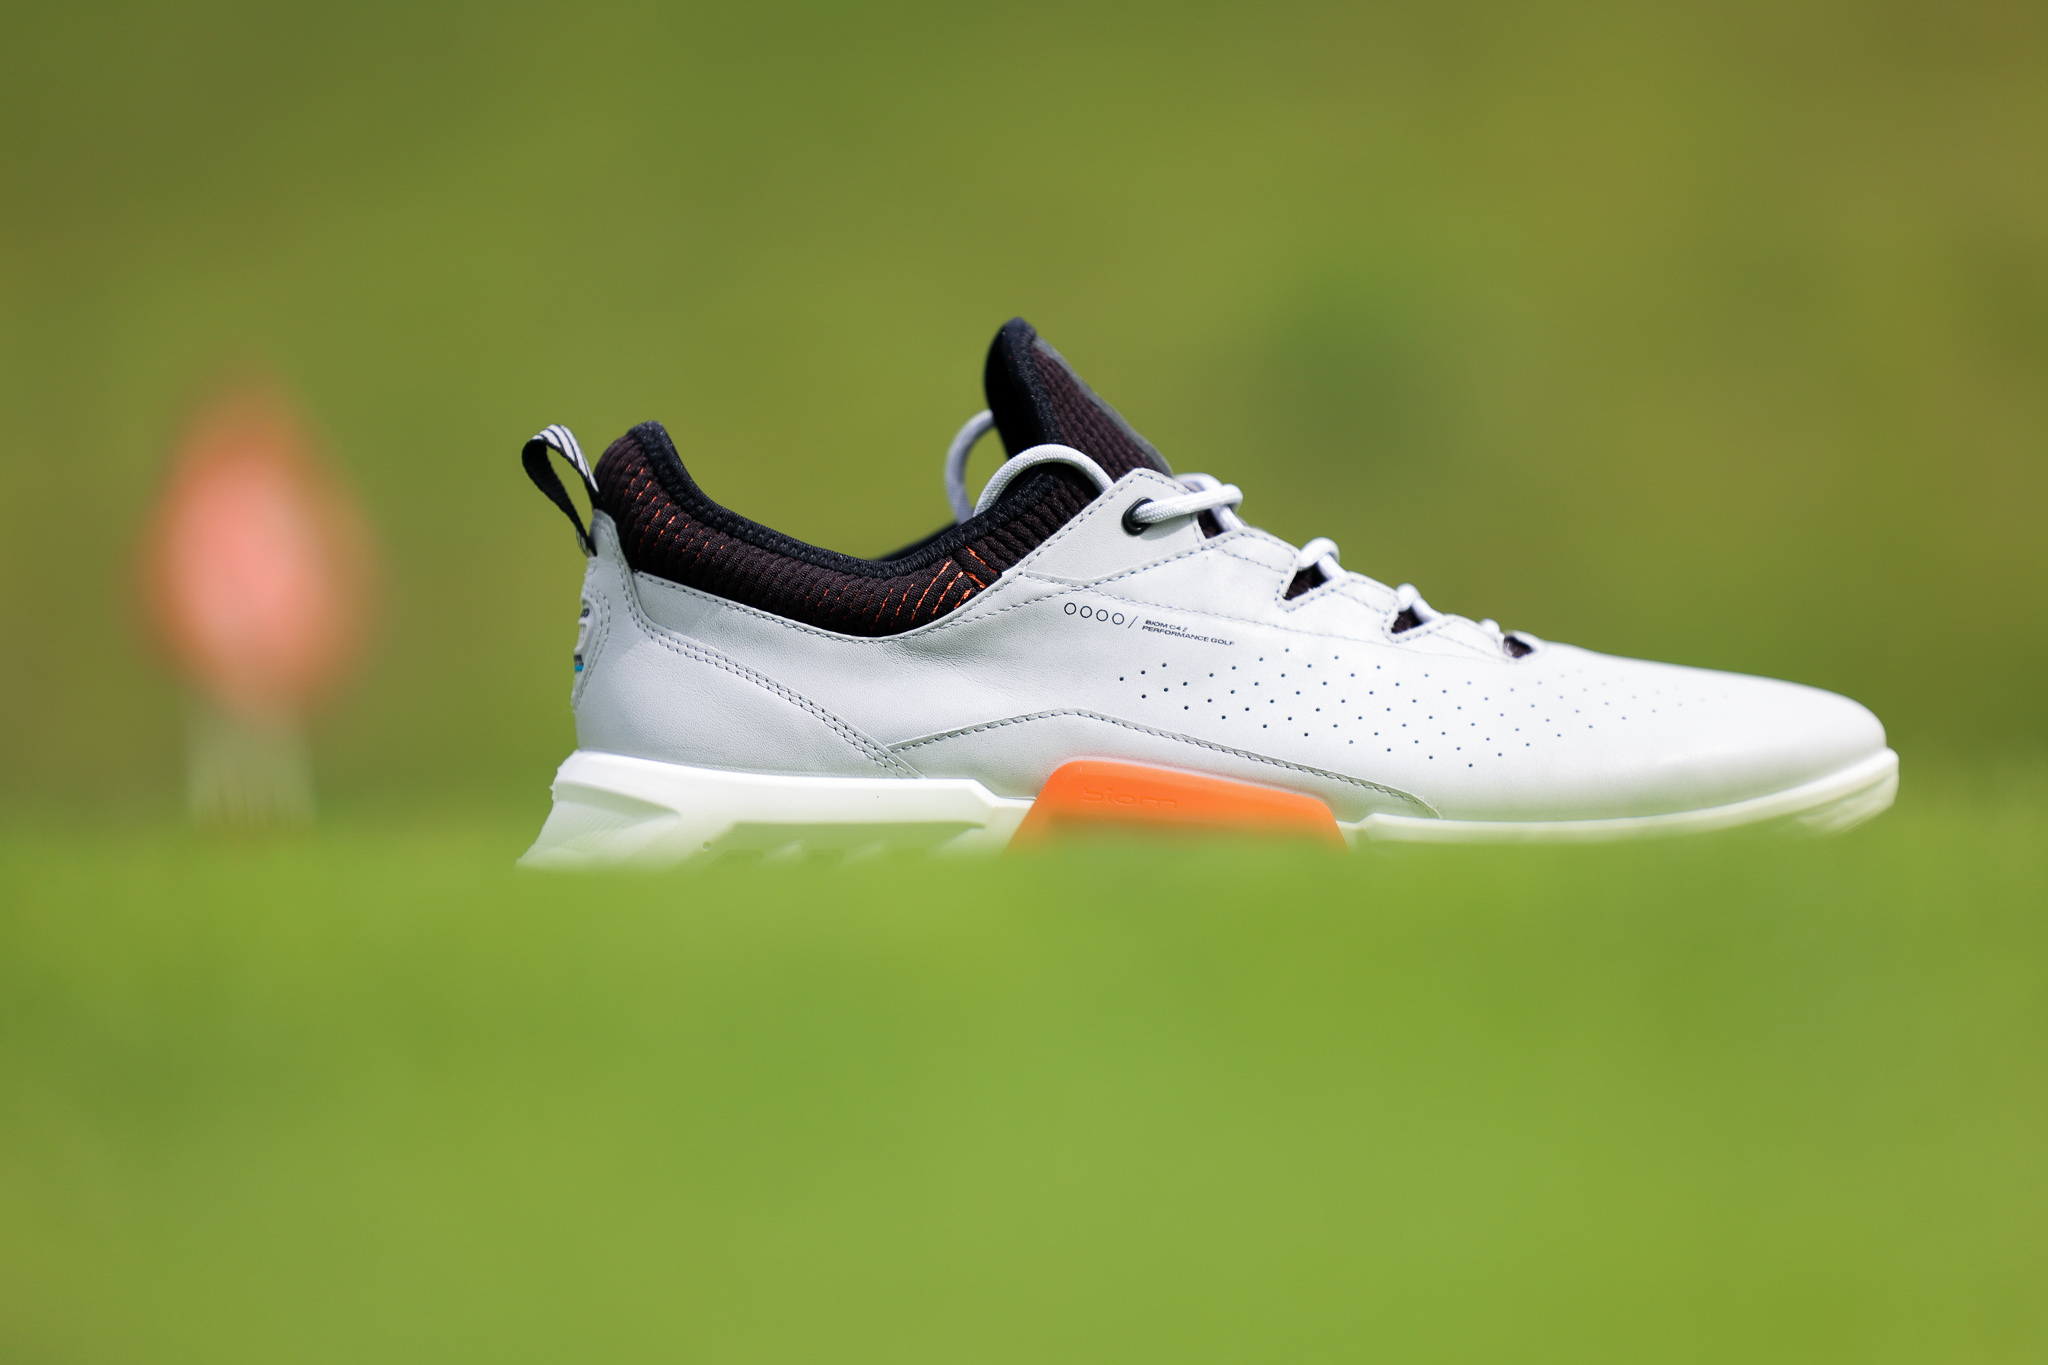 Ambacht Pracht bunker Ecco Biom C4 Review: The Best Golf Shoe I've Ever Owned -